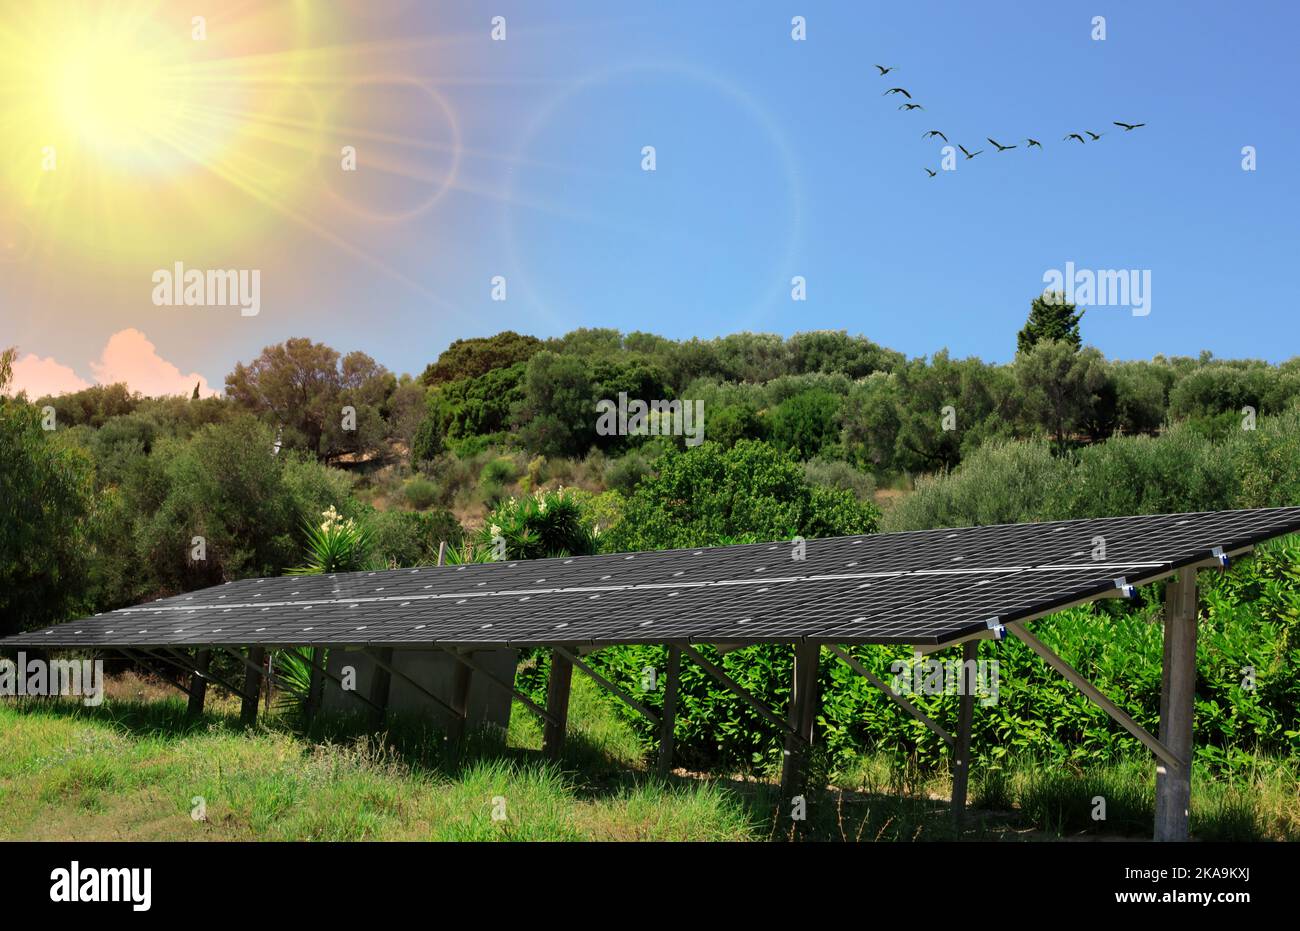 Black solar batteries in garden. Green garden with solar panels for solar energy, climate adaptation and stimulating biodiversity. Stock Photo